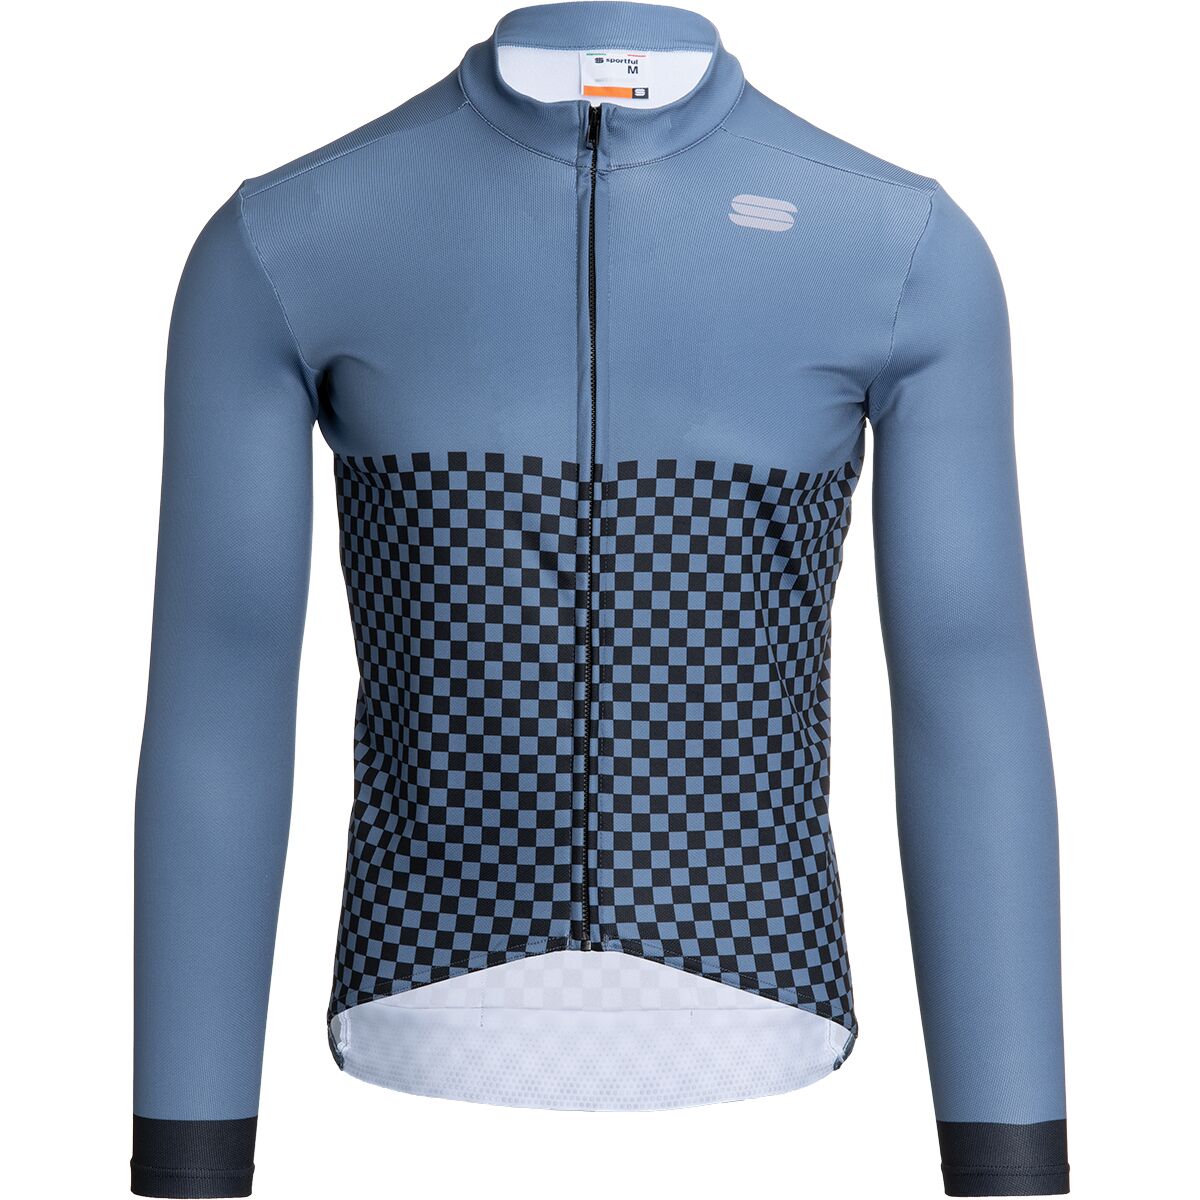 Sportful Checkmate Thermal Jersey - Men's